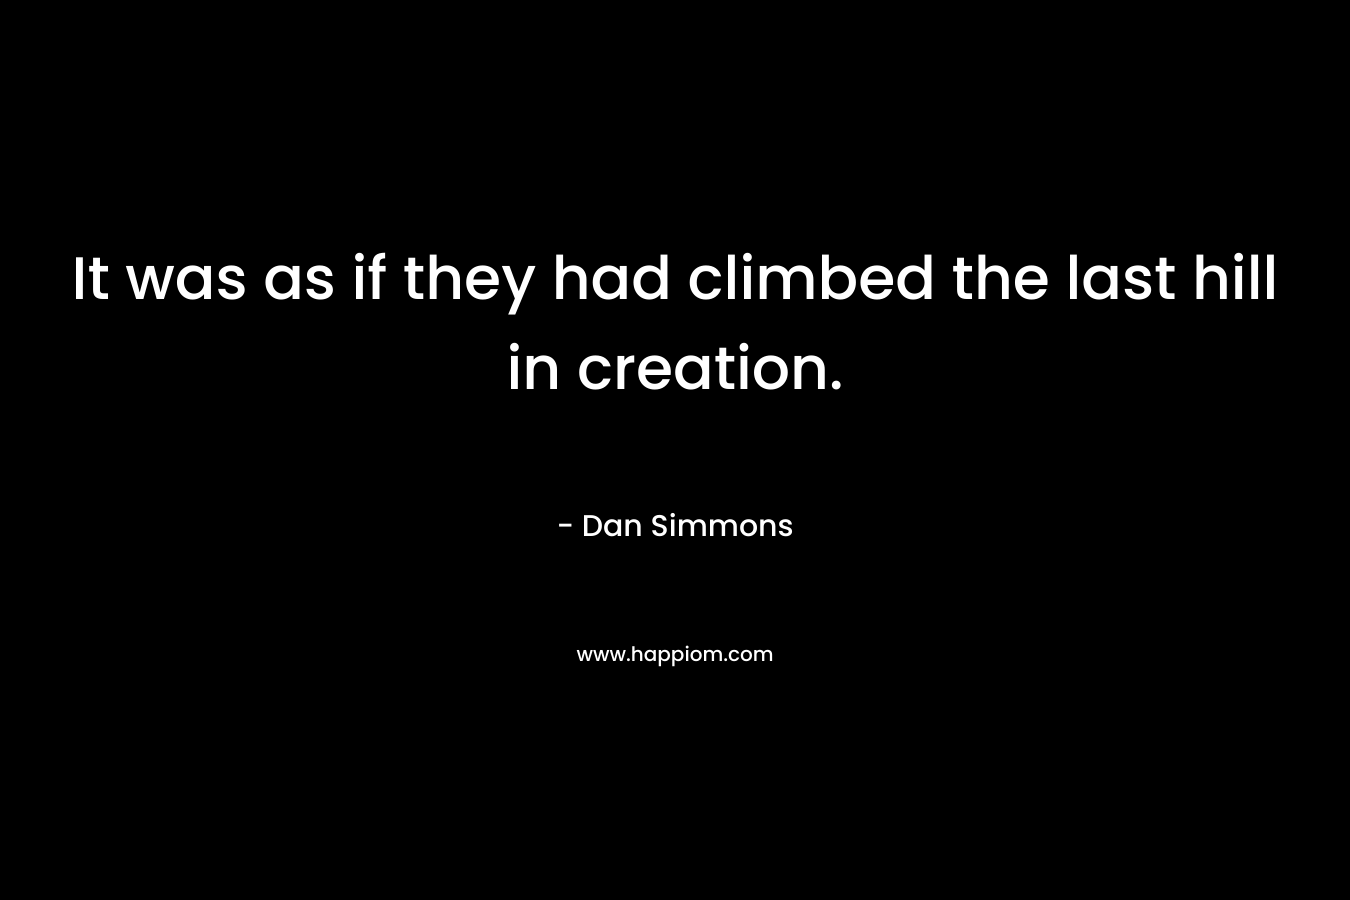 It was as if they had climbed the last hill in creation. – Dan Simmons